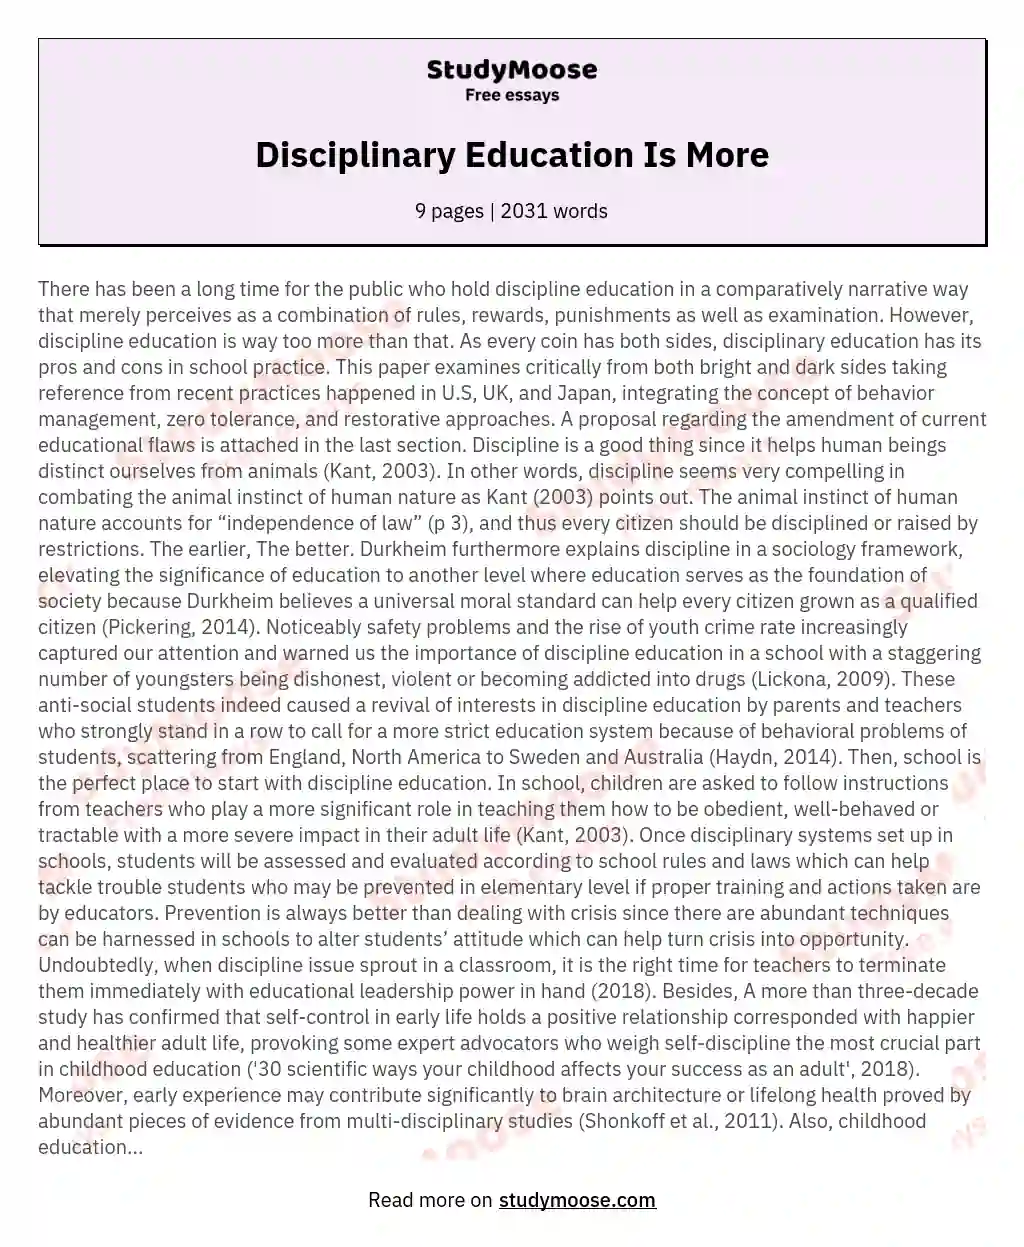 Disciplinary Education Is More essay